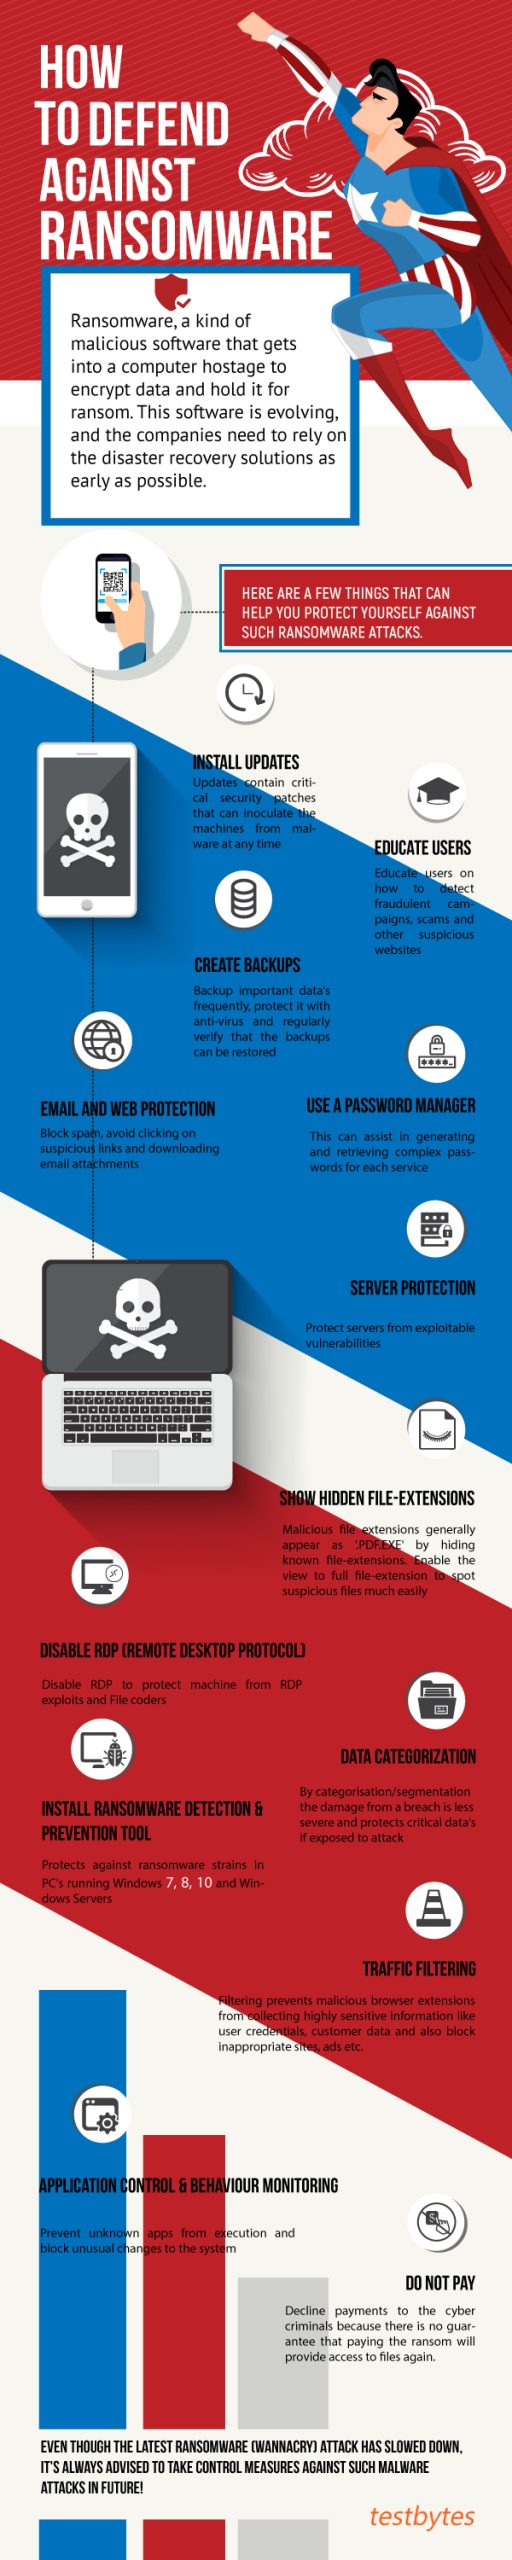 How-to-Defend-Against-Ransomware-infographic